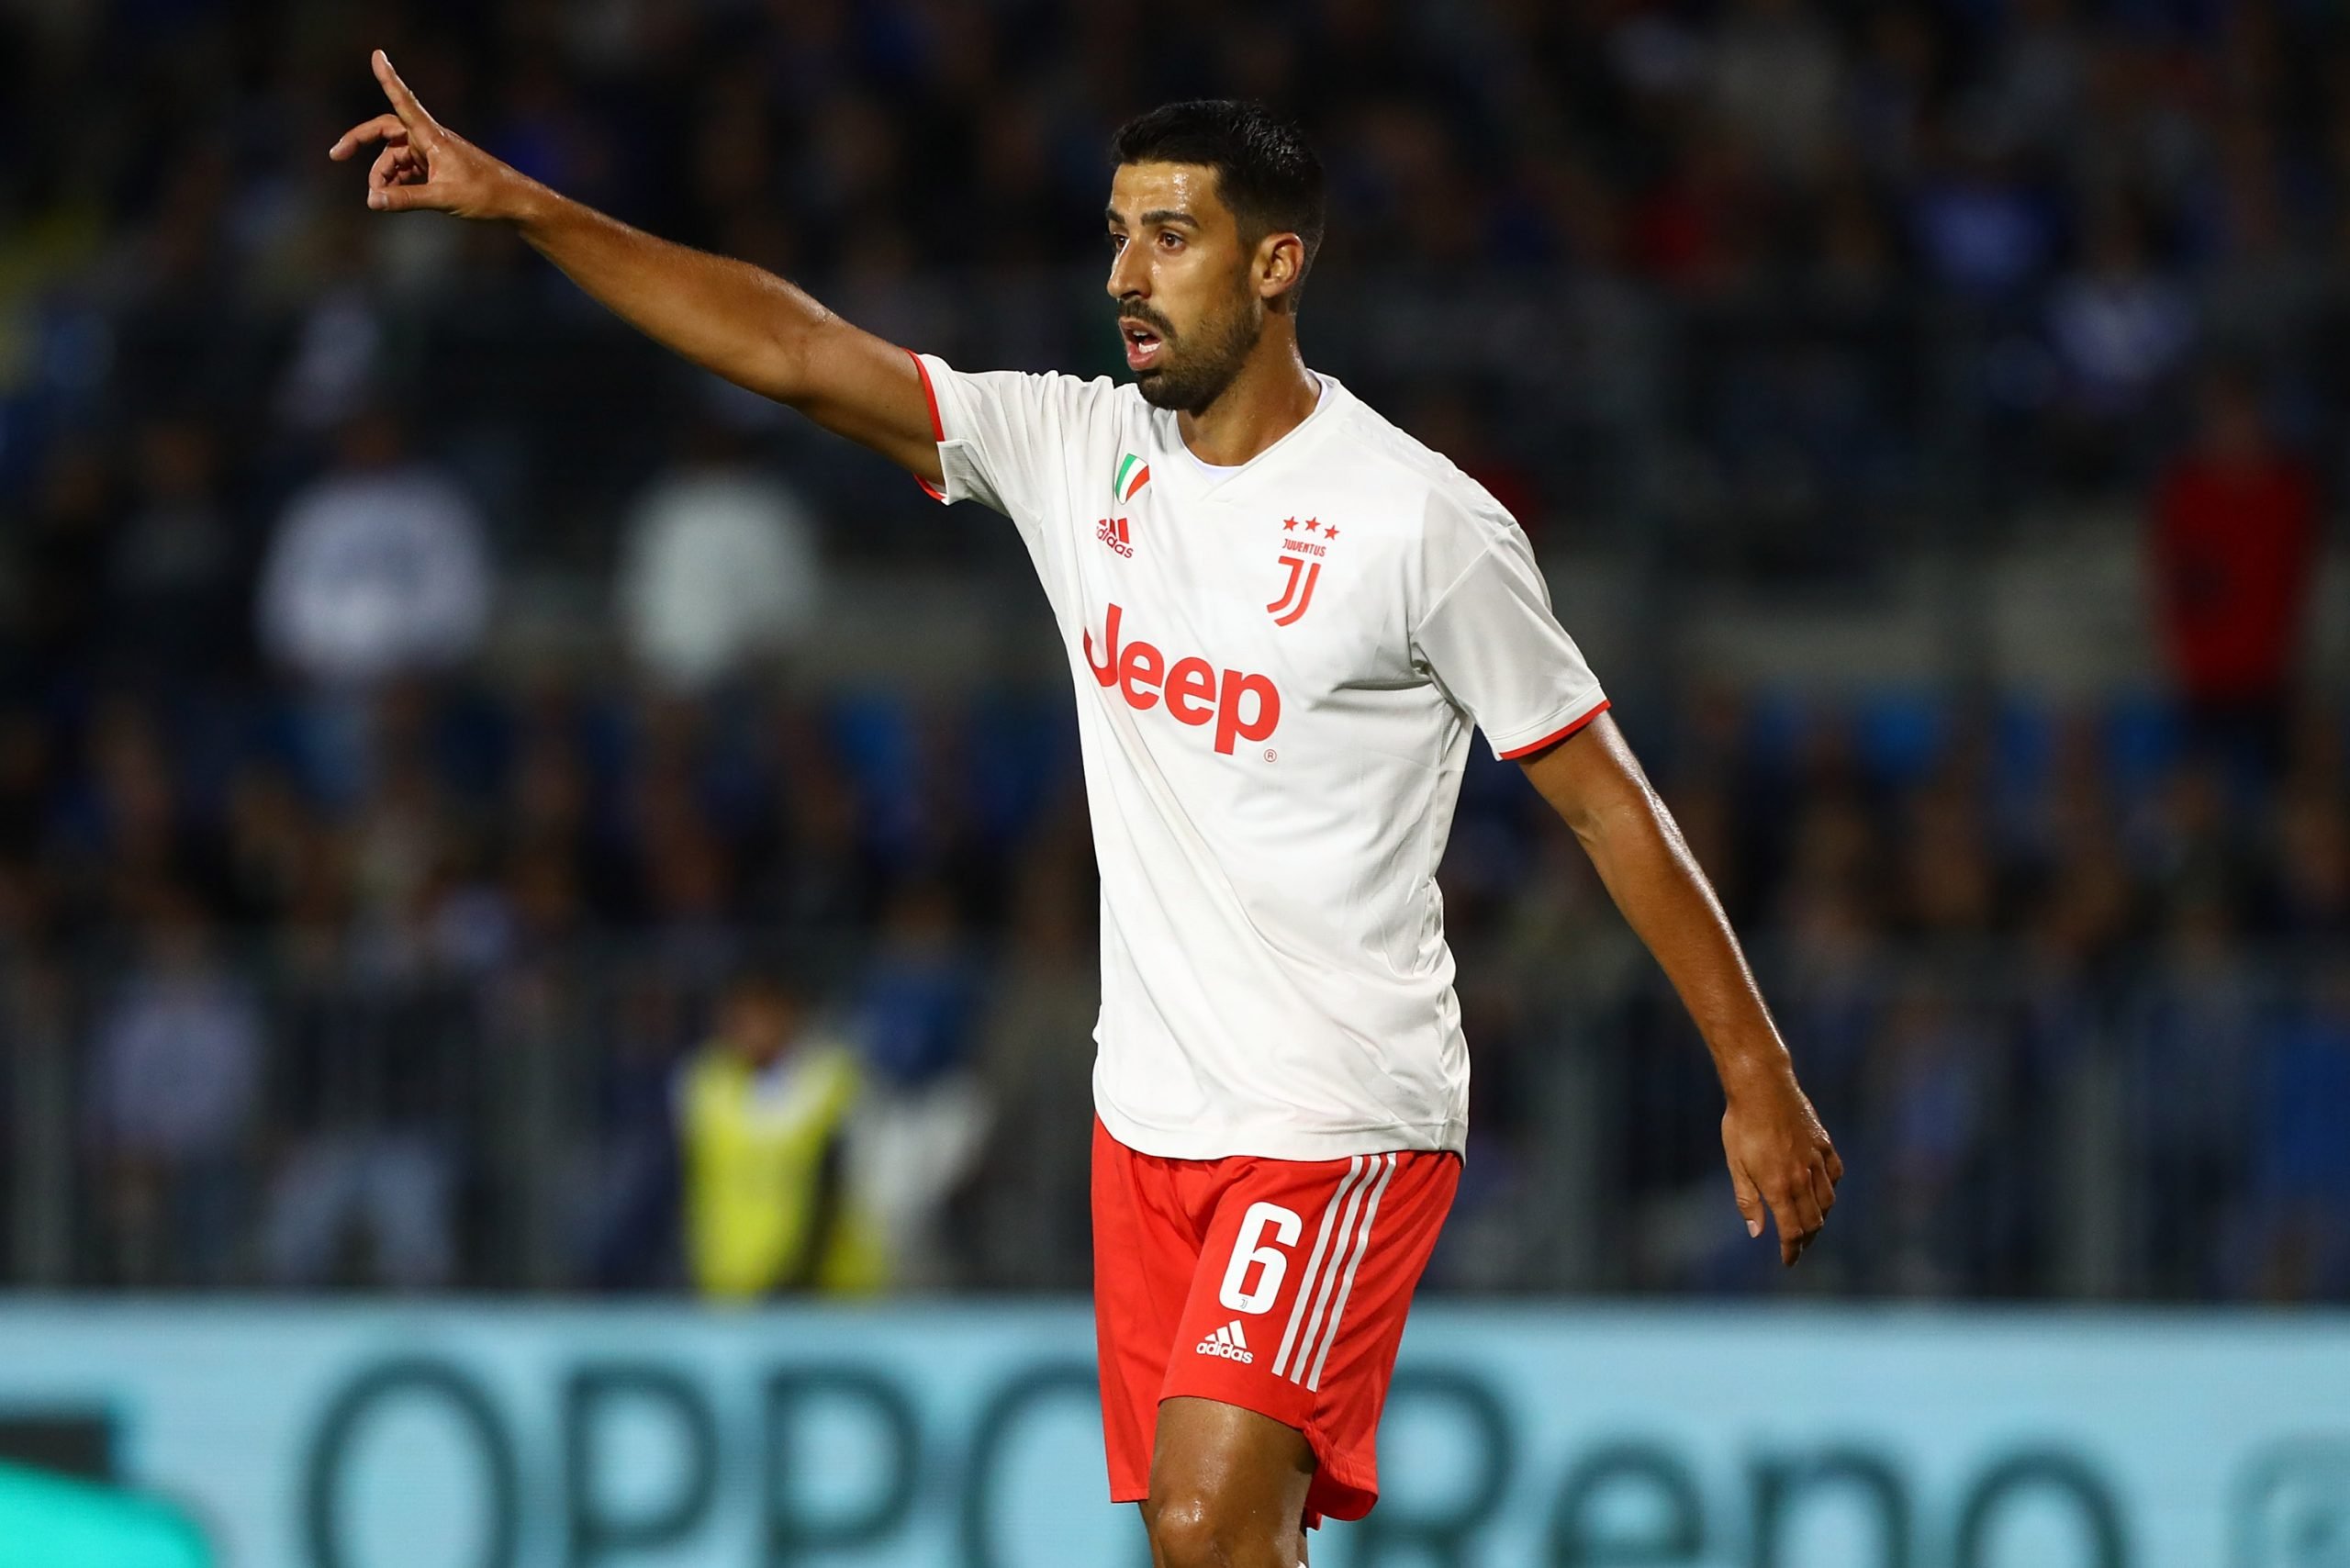 Everton willing to take a chance on Sami Khedira who is seen in the photo